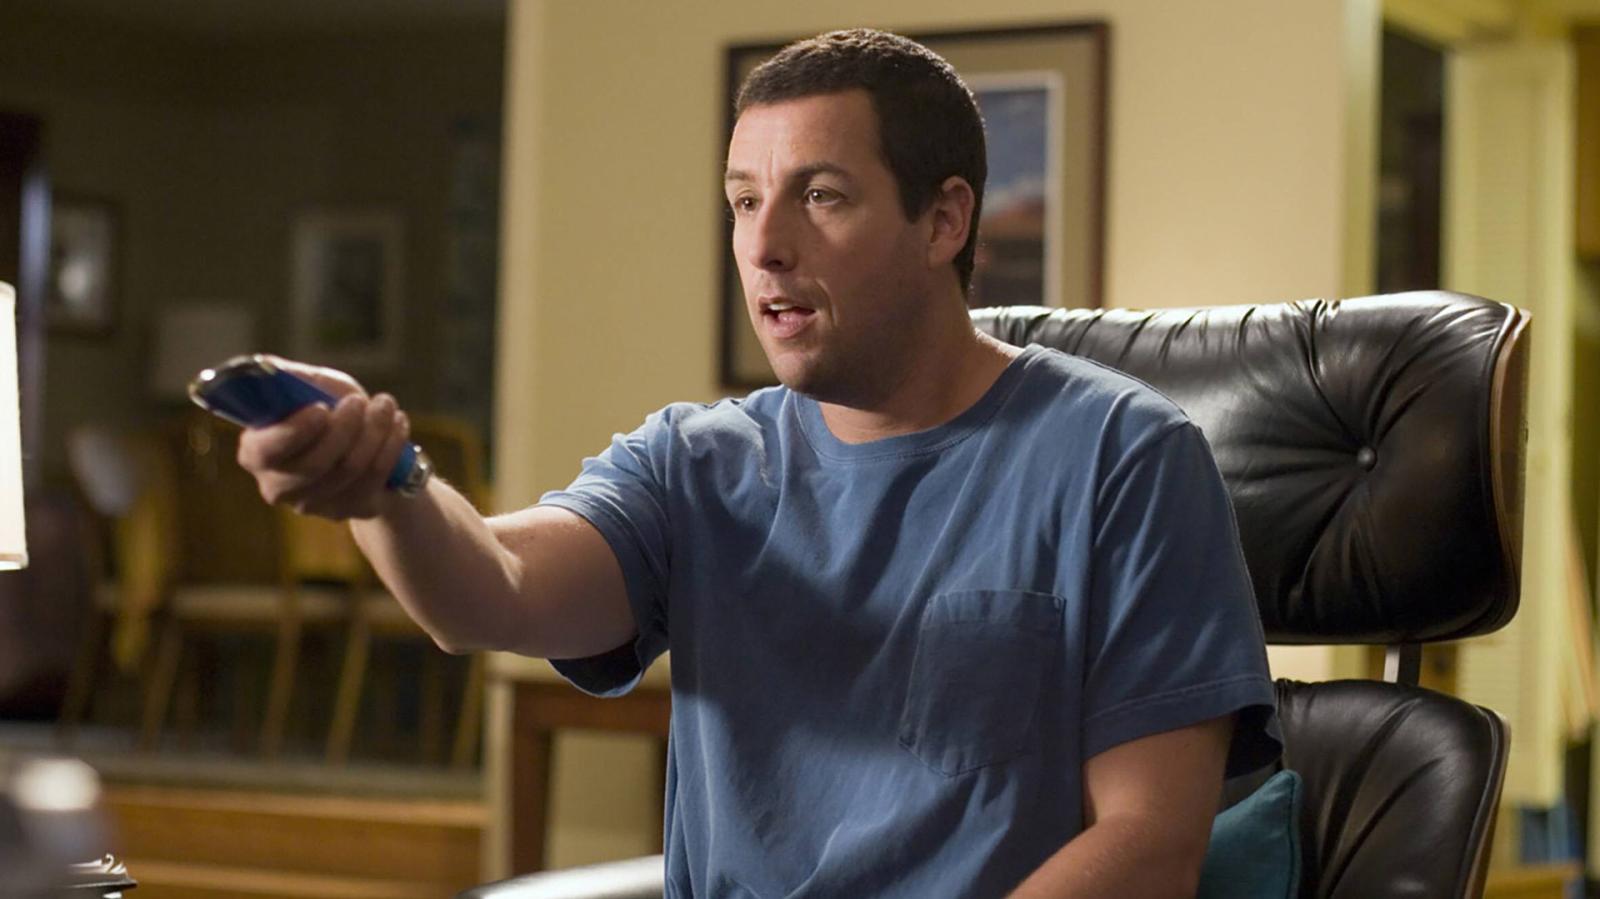 15 Best Movies With Adam Sandler to Watch With Family - image 4